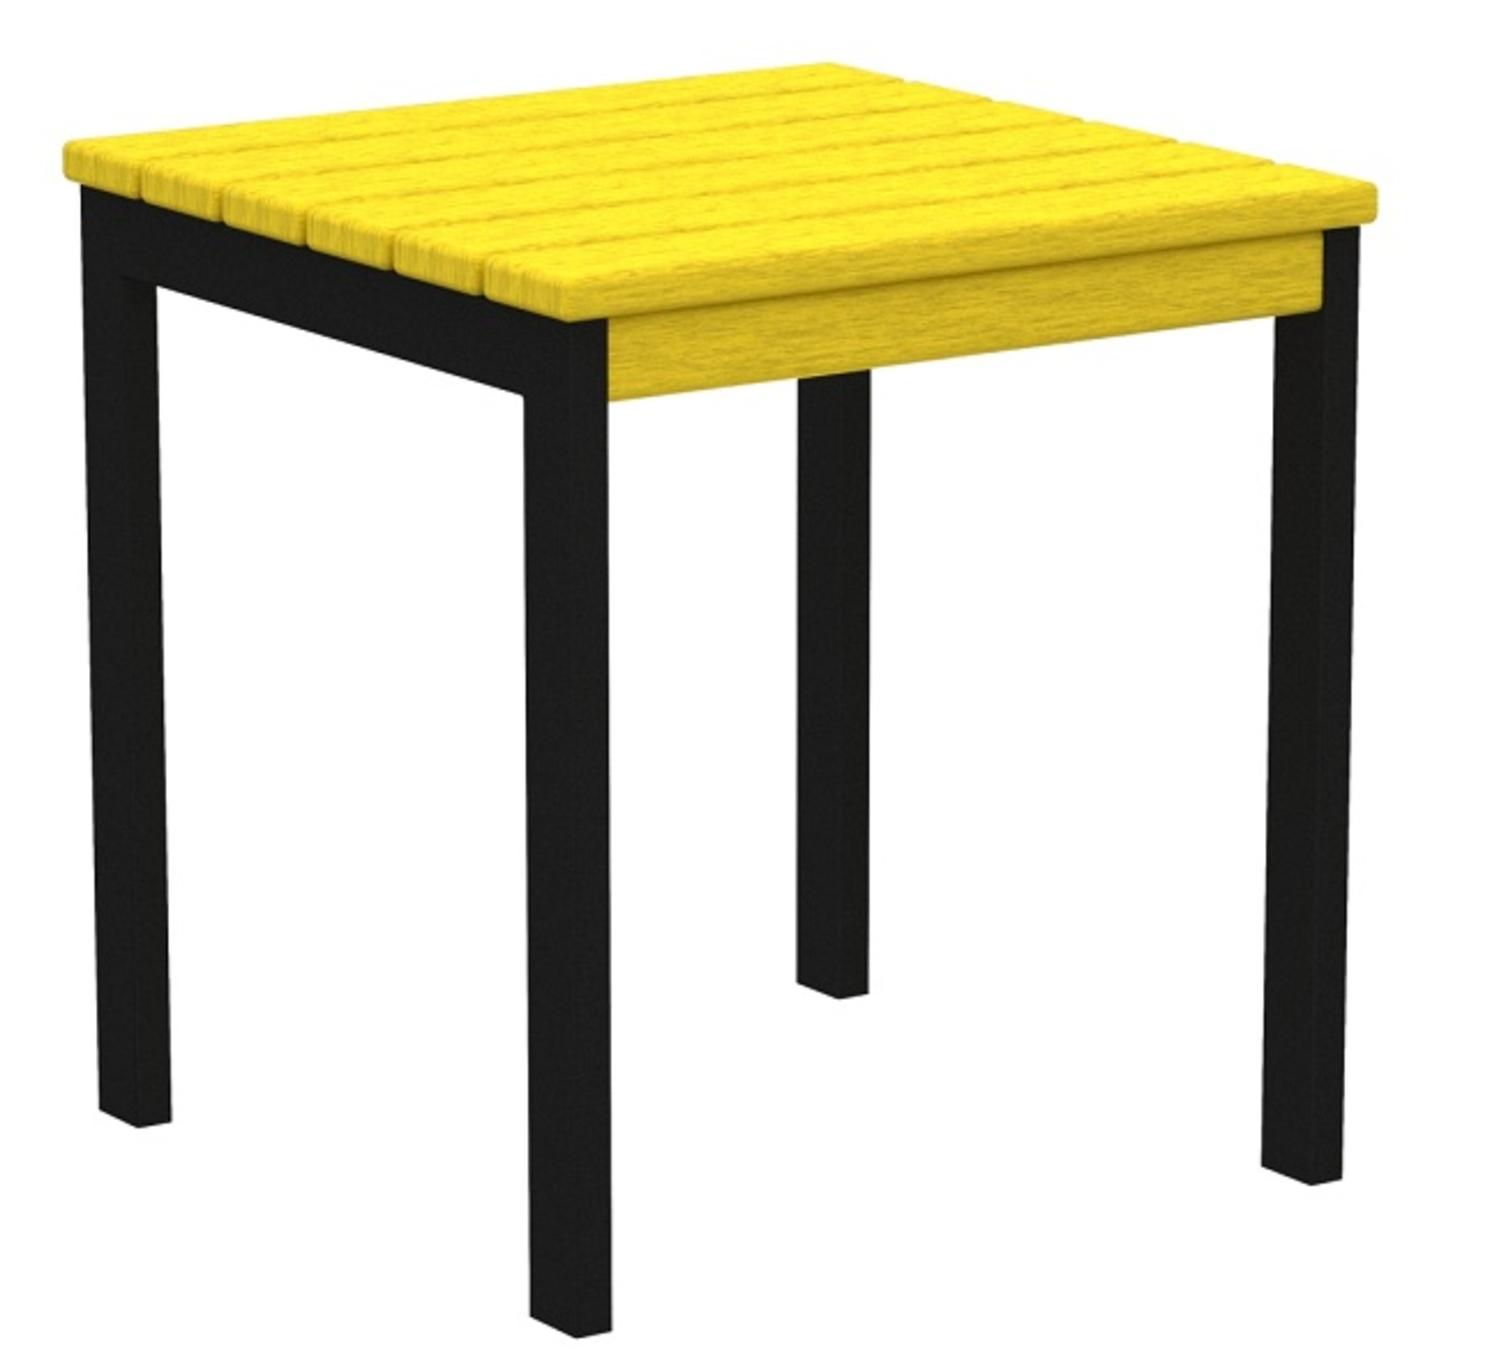 Eco-Friendly Furnishings  18" Recycled Earth-Friendly Square Side Table - Lemon Yellow with Black Frame